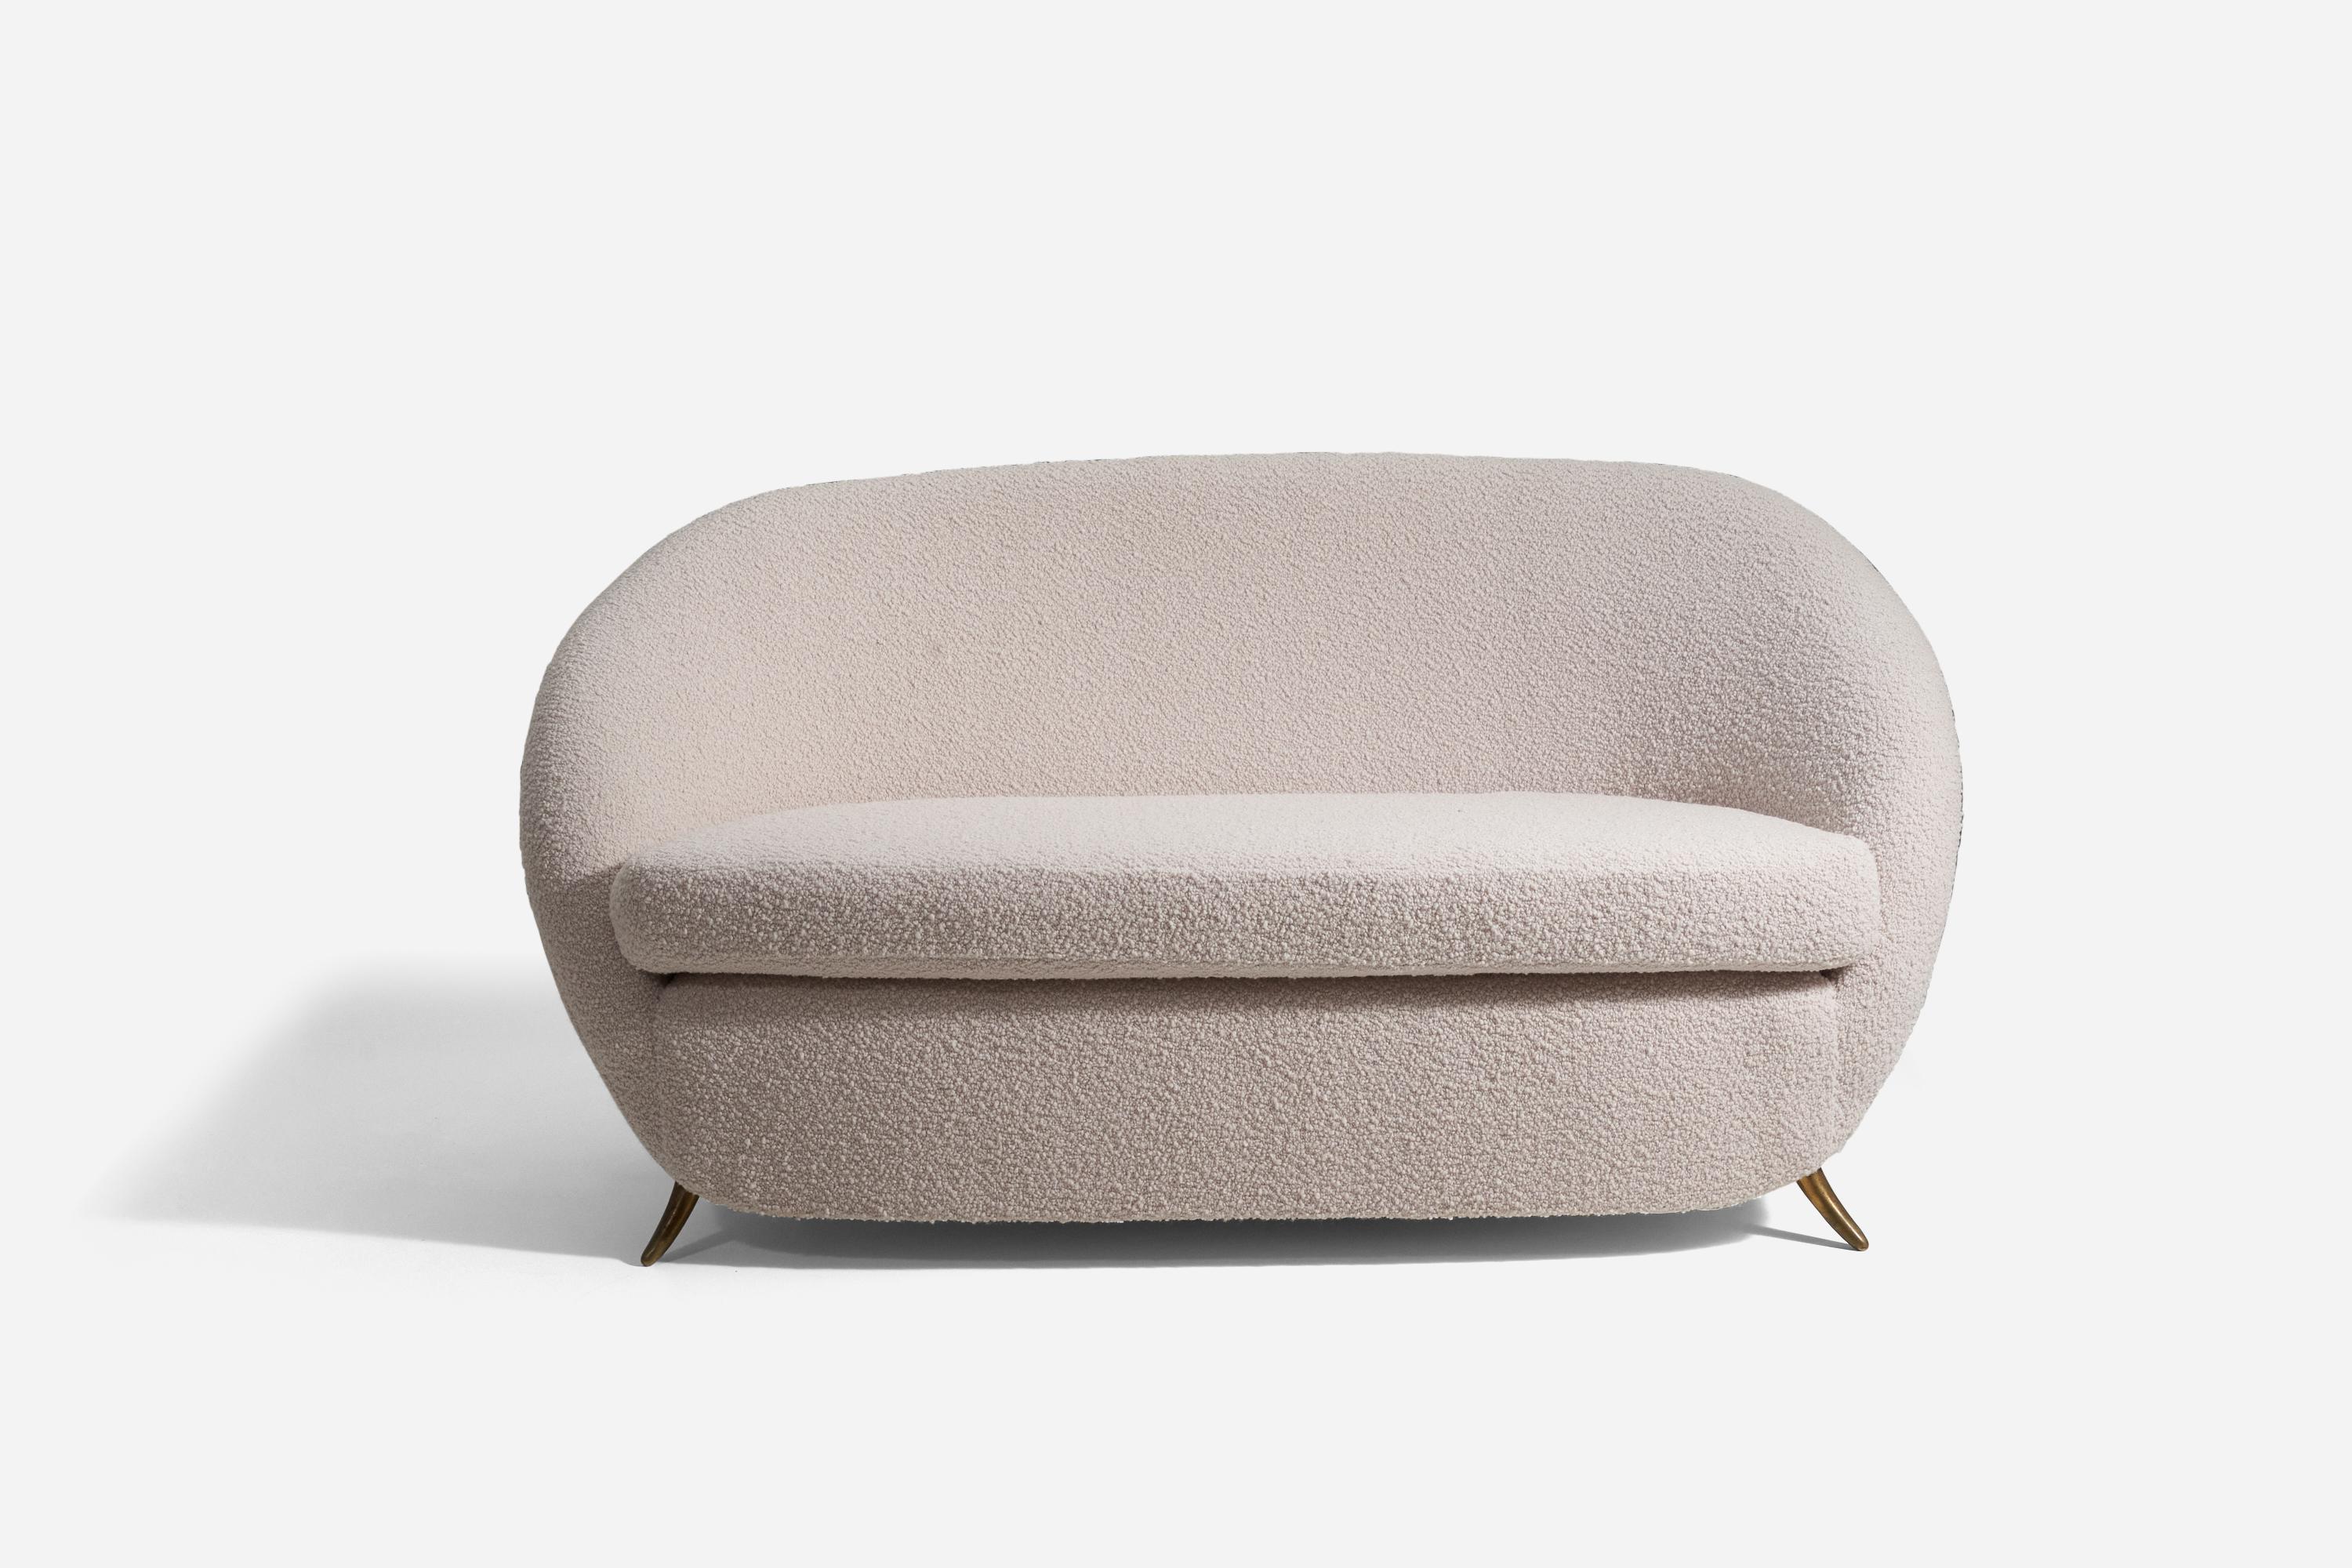 An organic settee / two-seat sofa. Designed by Guglielmo Veronesi, produced by ISA Bergamo, Italy, 1950s. 

Reupholstered in a brand new high-end bouclé fabric from Pierre Frey.